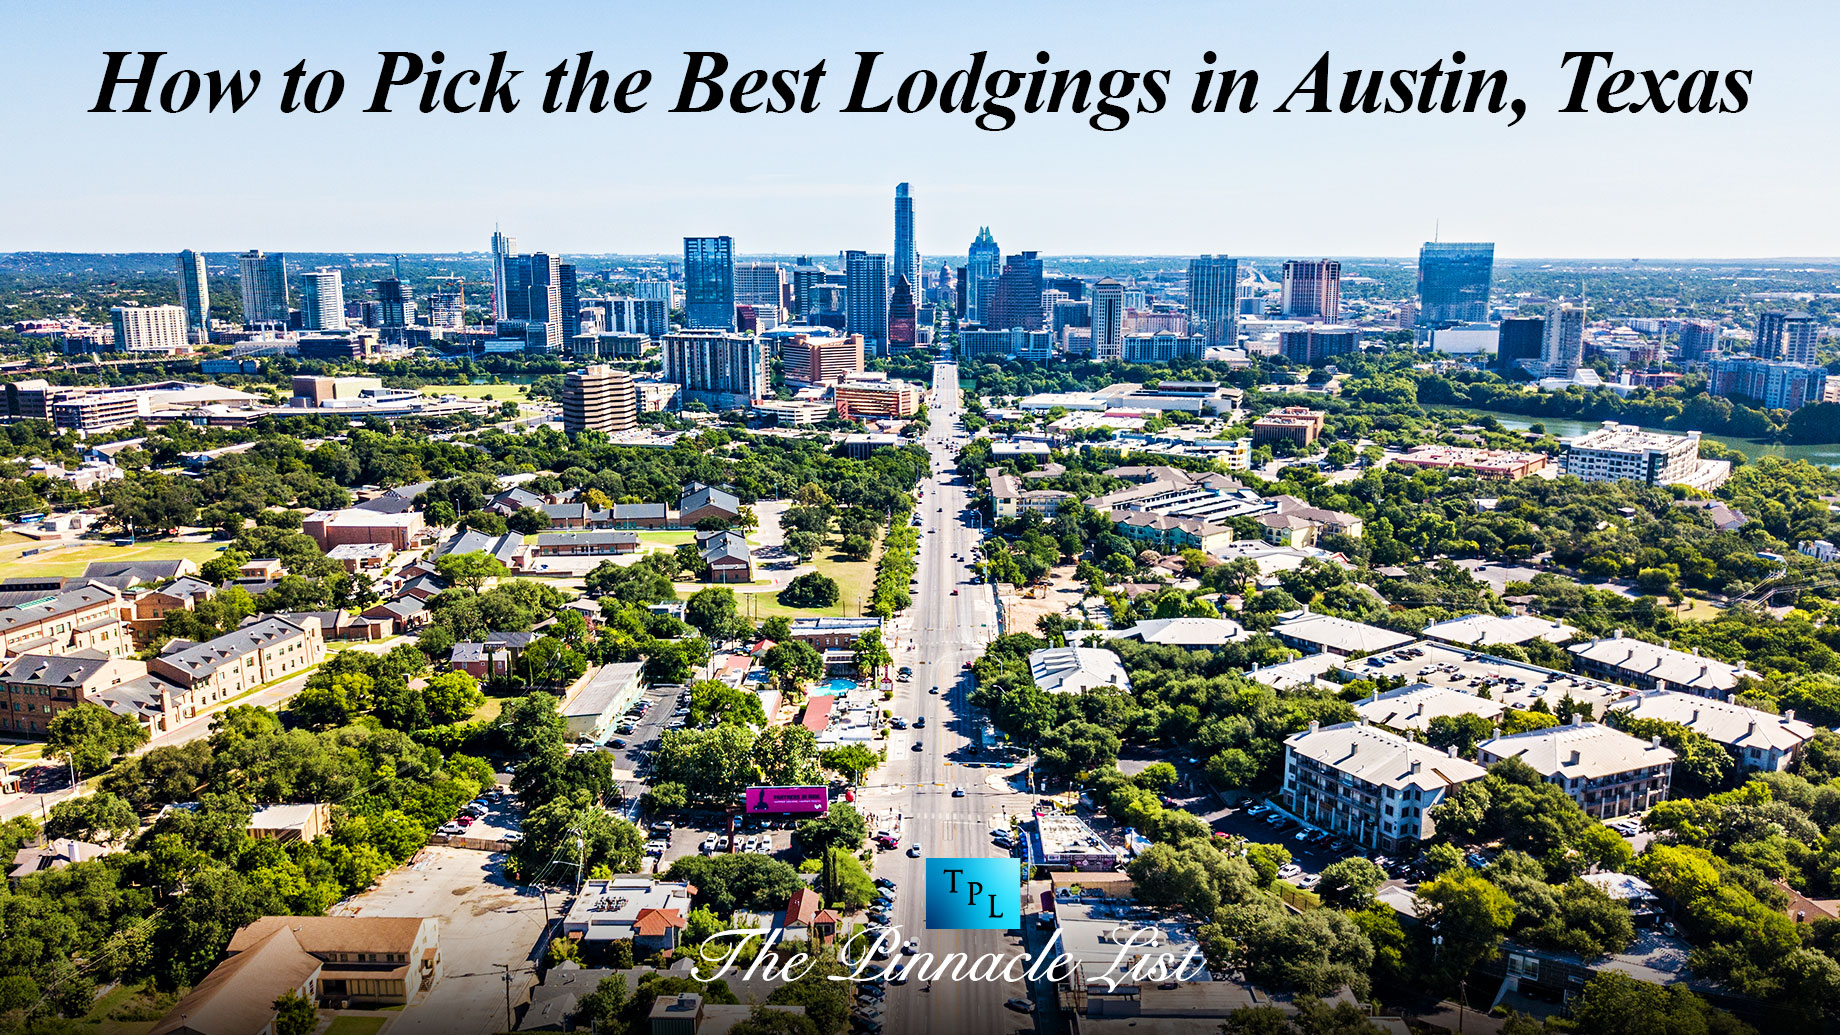 How to Pick the Best Lodgings in Austin, Texas